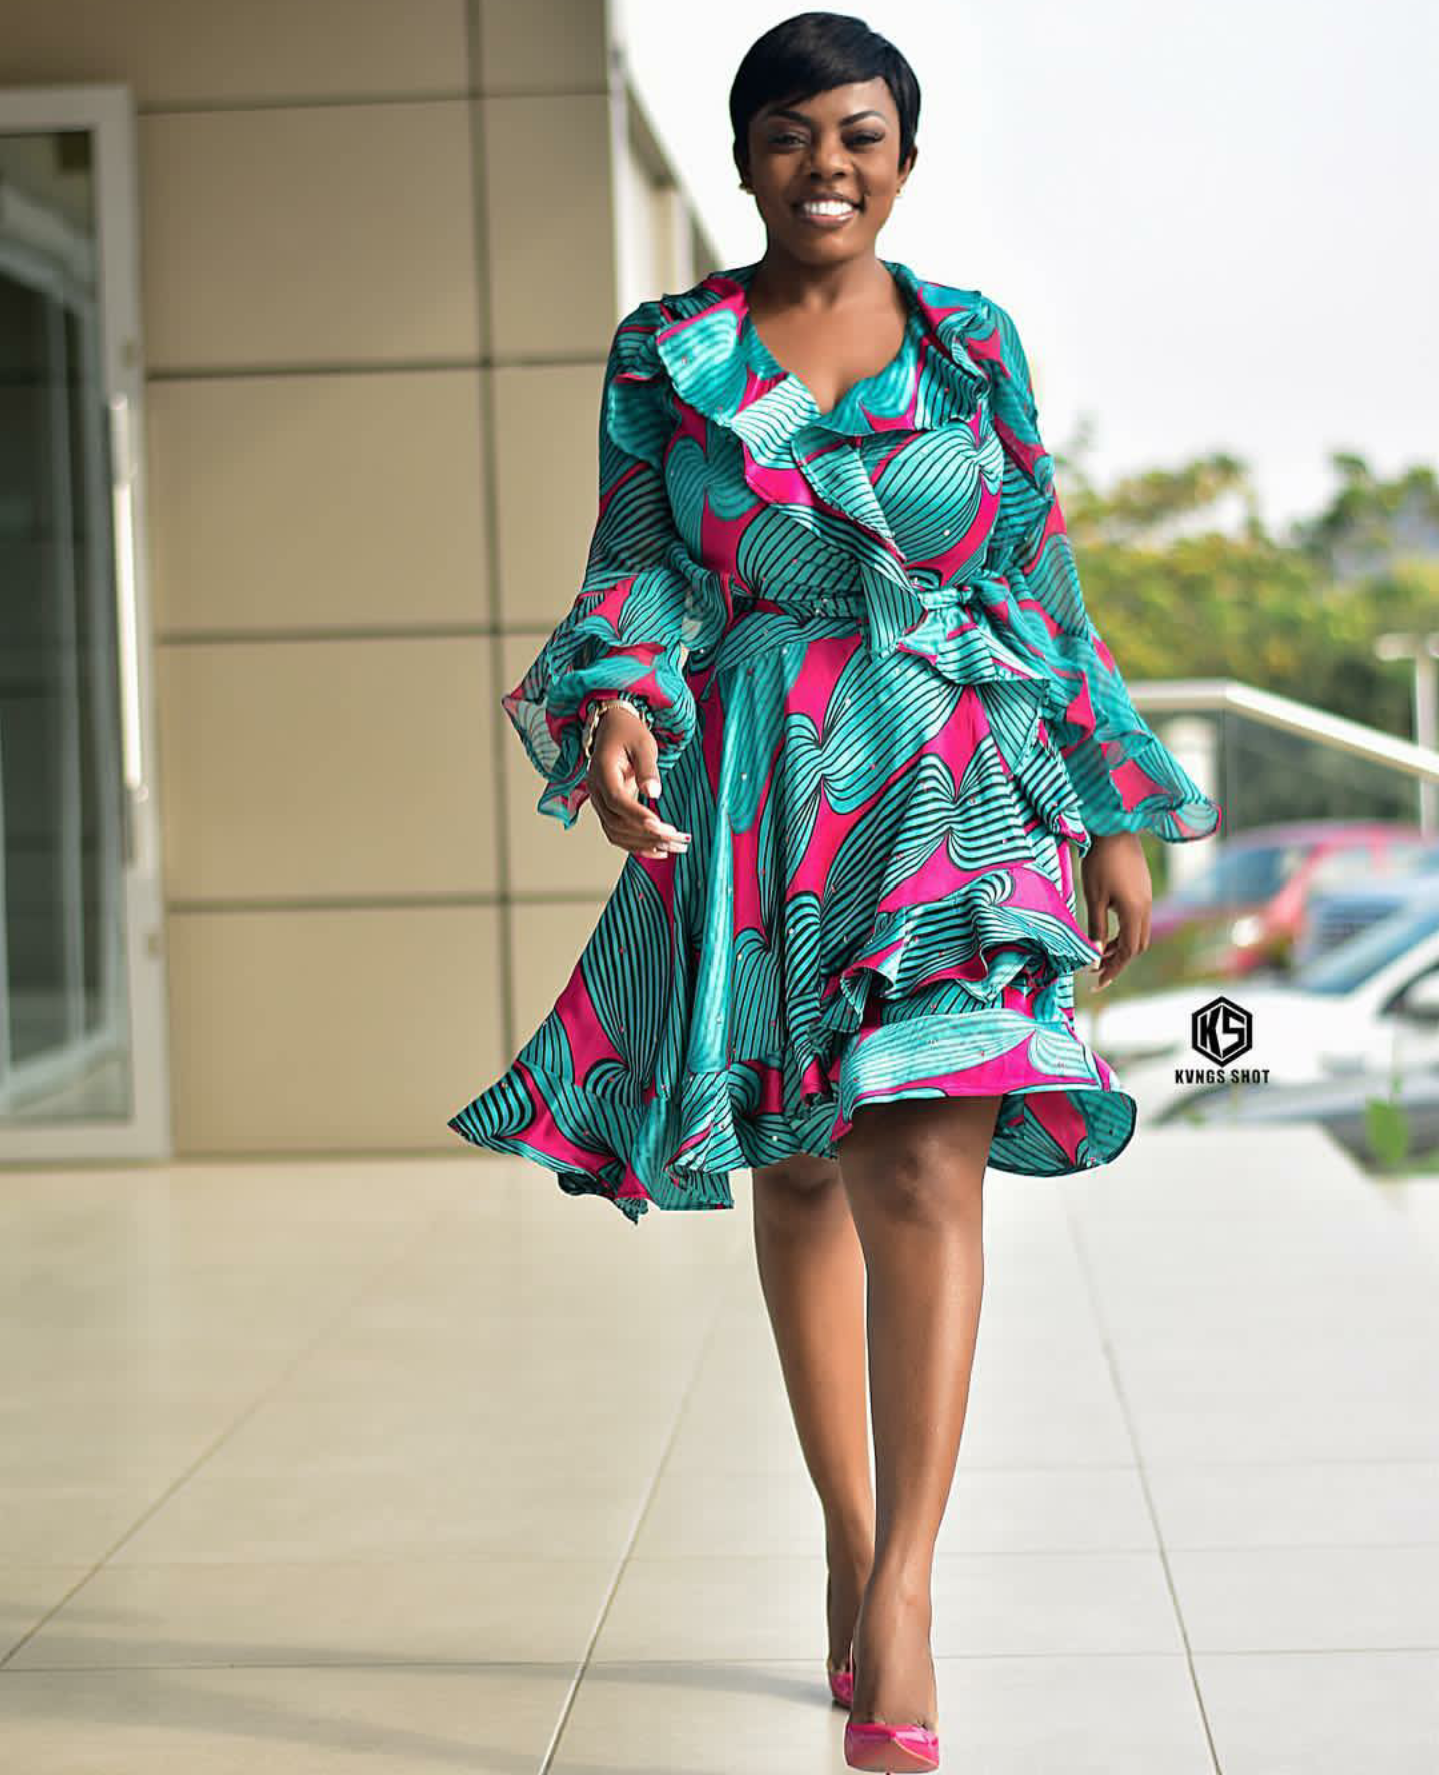 Nana Ana served us some chicness in this laurencouture dress